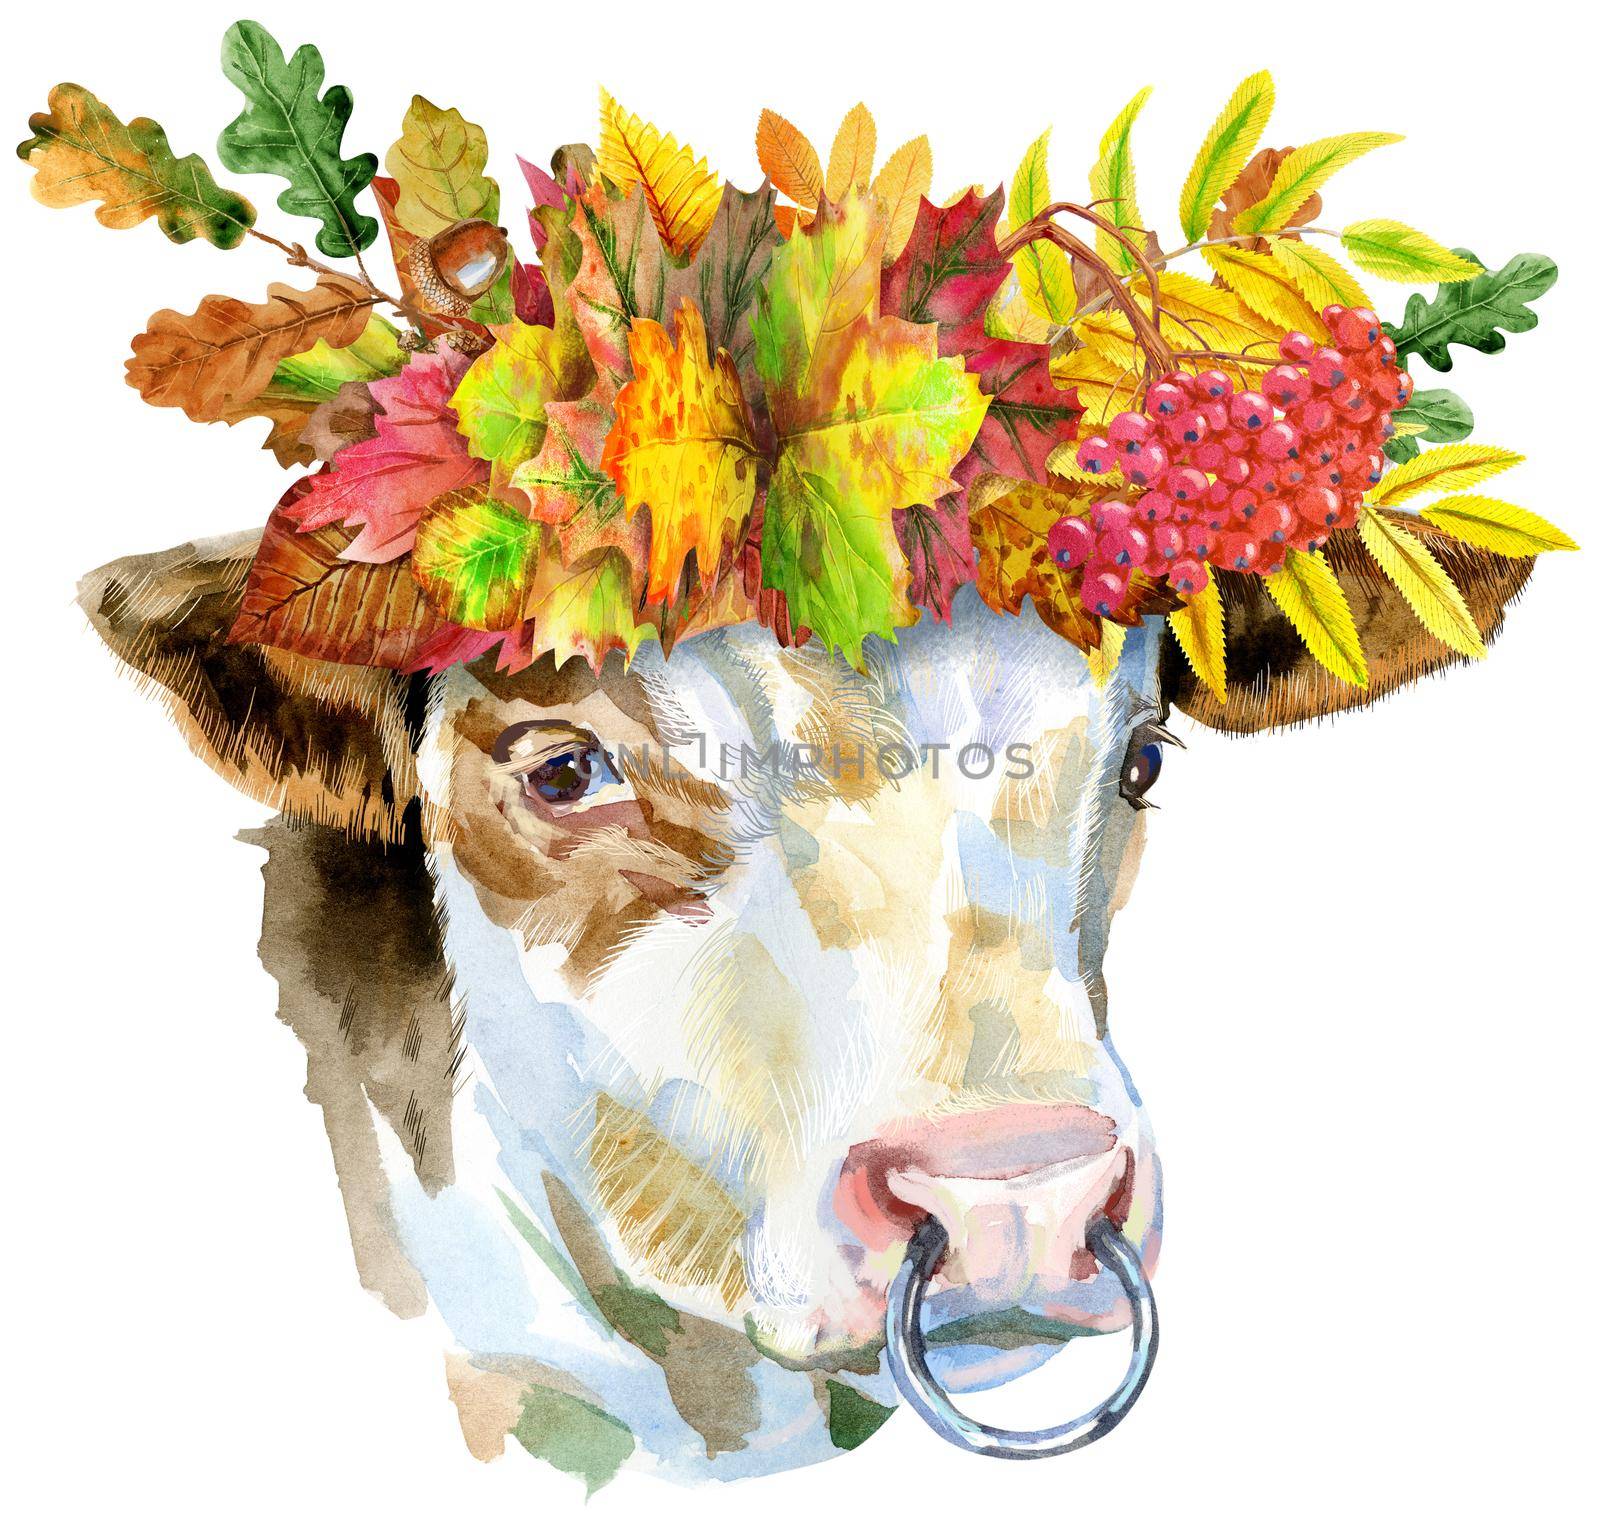 Bull watercolor graphics. Bull animal in a wreath of autumn leaves. Illustration with splash watercolor textured background.